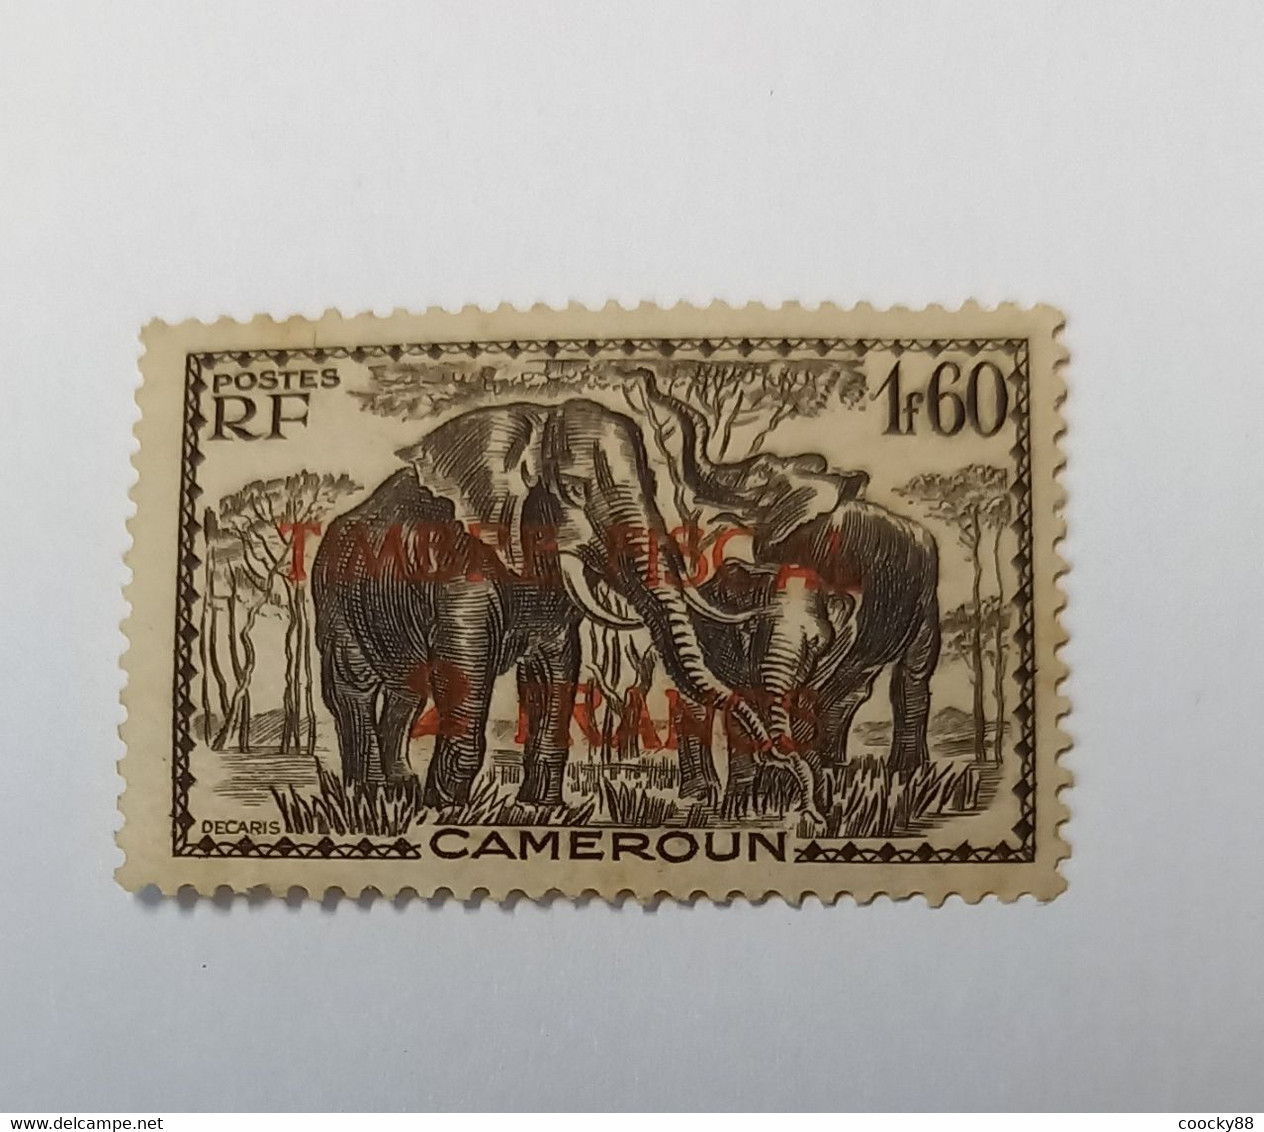 Timbre Du CAMEROUN RF N° 183 Yvert & Tellier Surcharge TIMBRE FISCAL - Africa (Other)